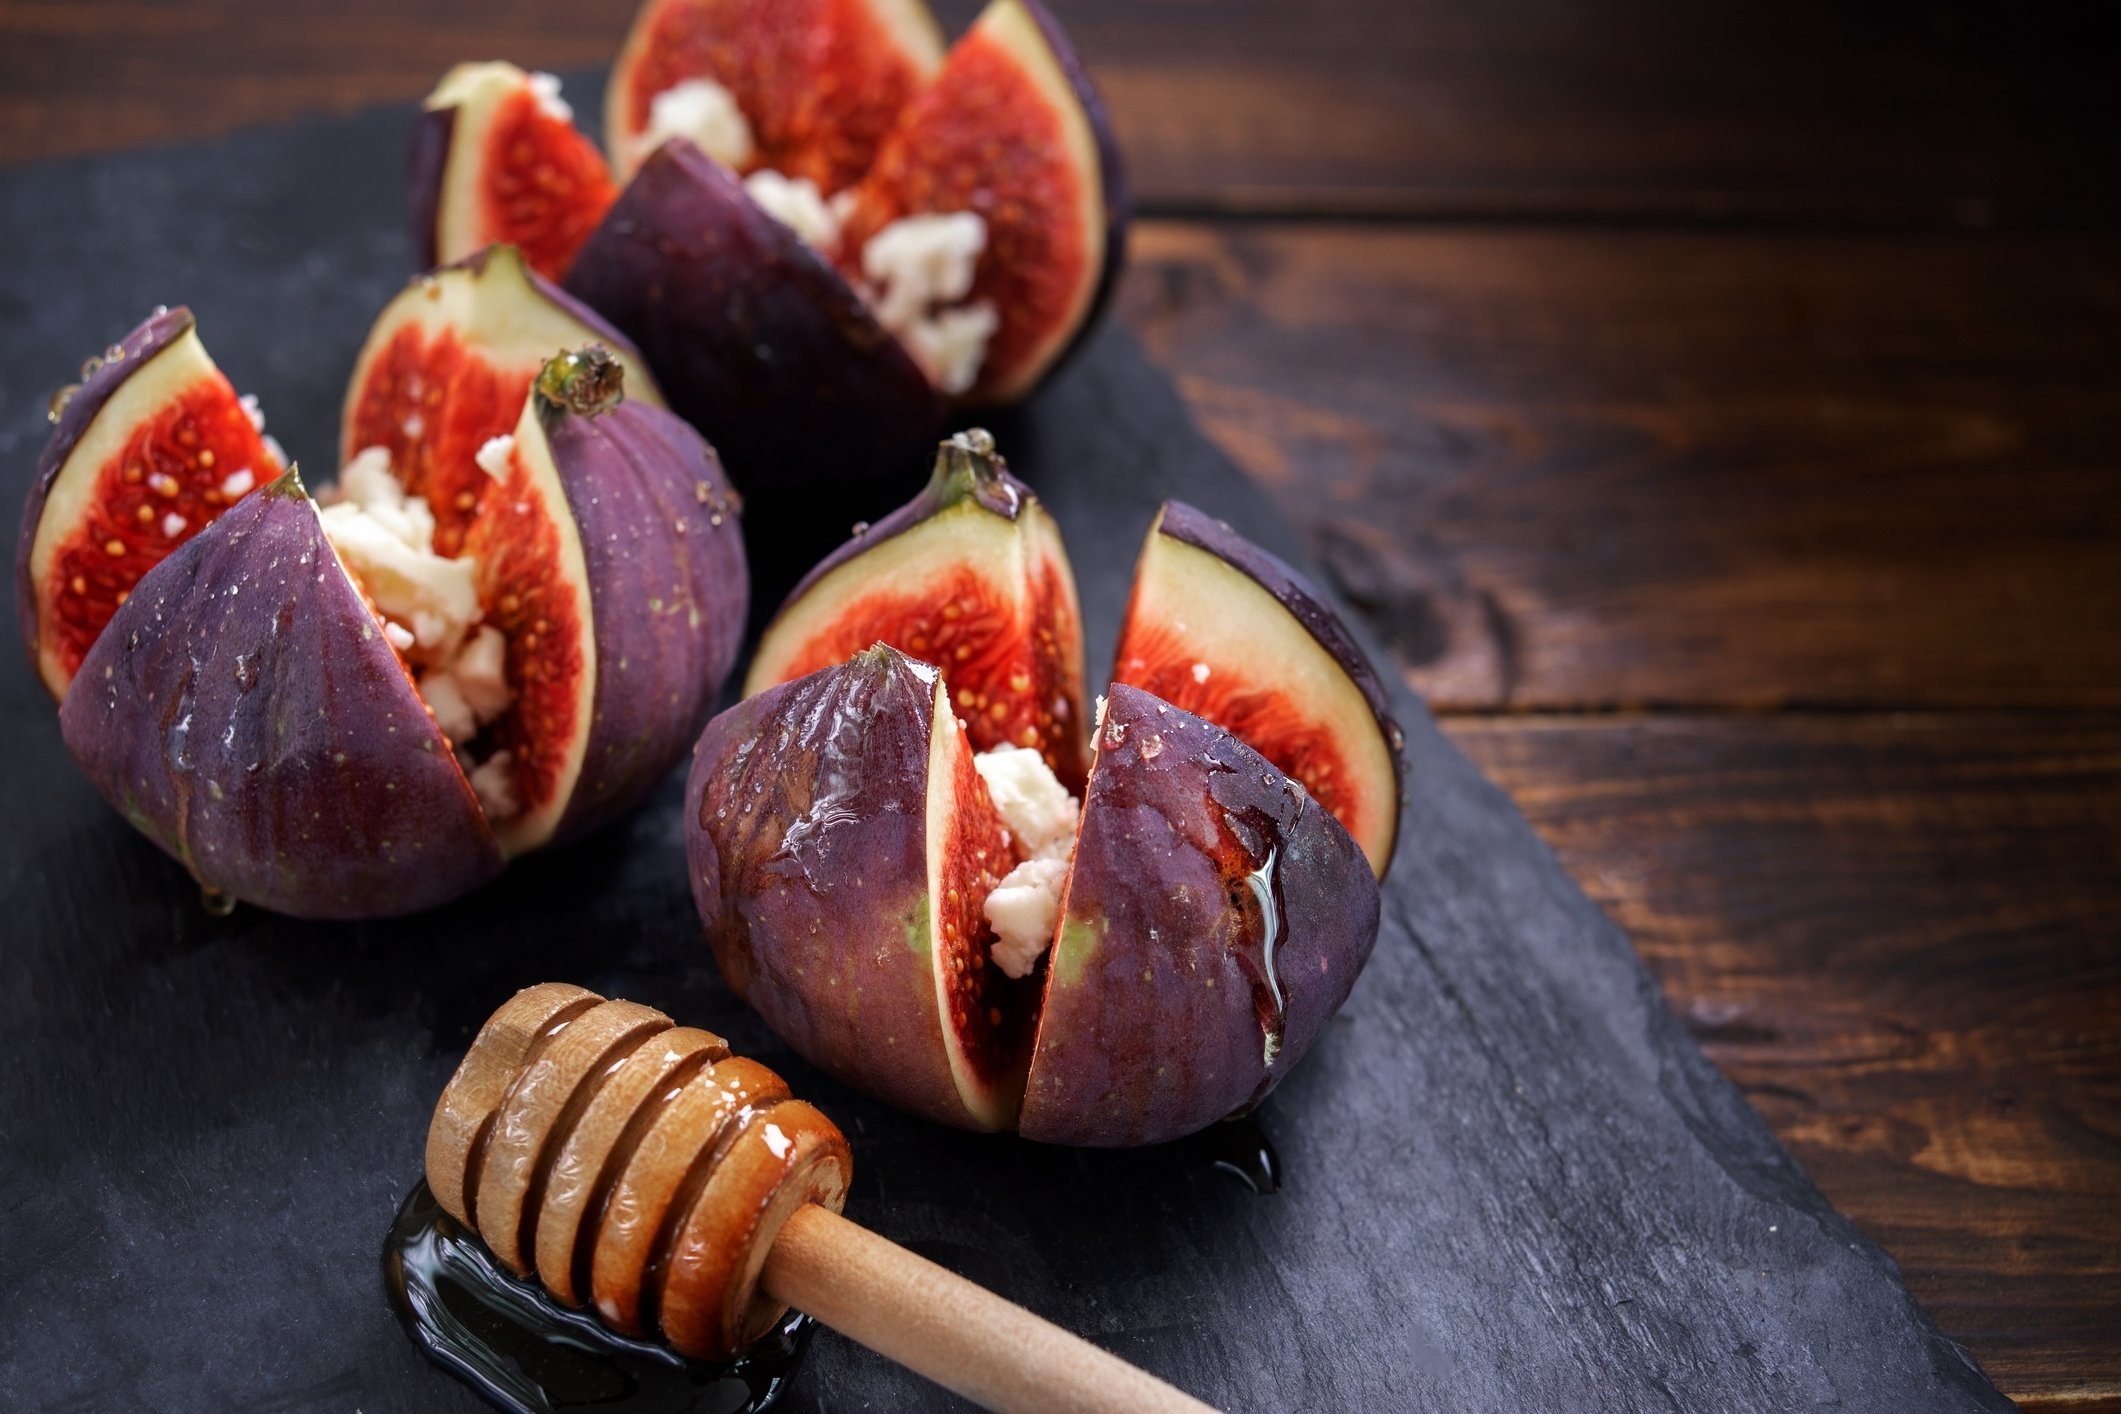 Fig: Often recommended to nourish and tone the intestines. 2130x1420 HD Wallpaper.